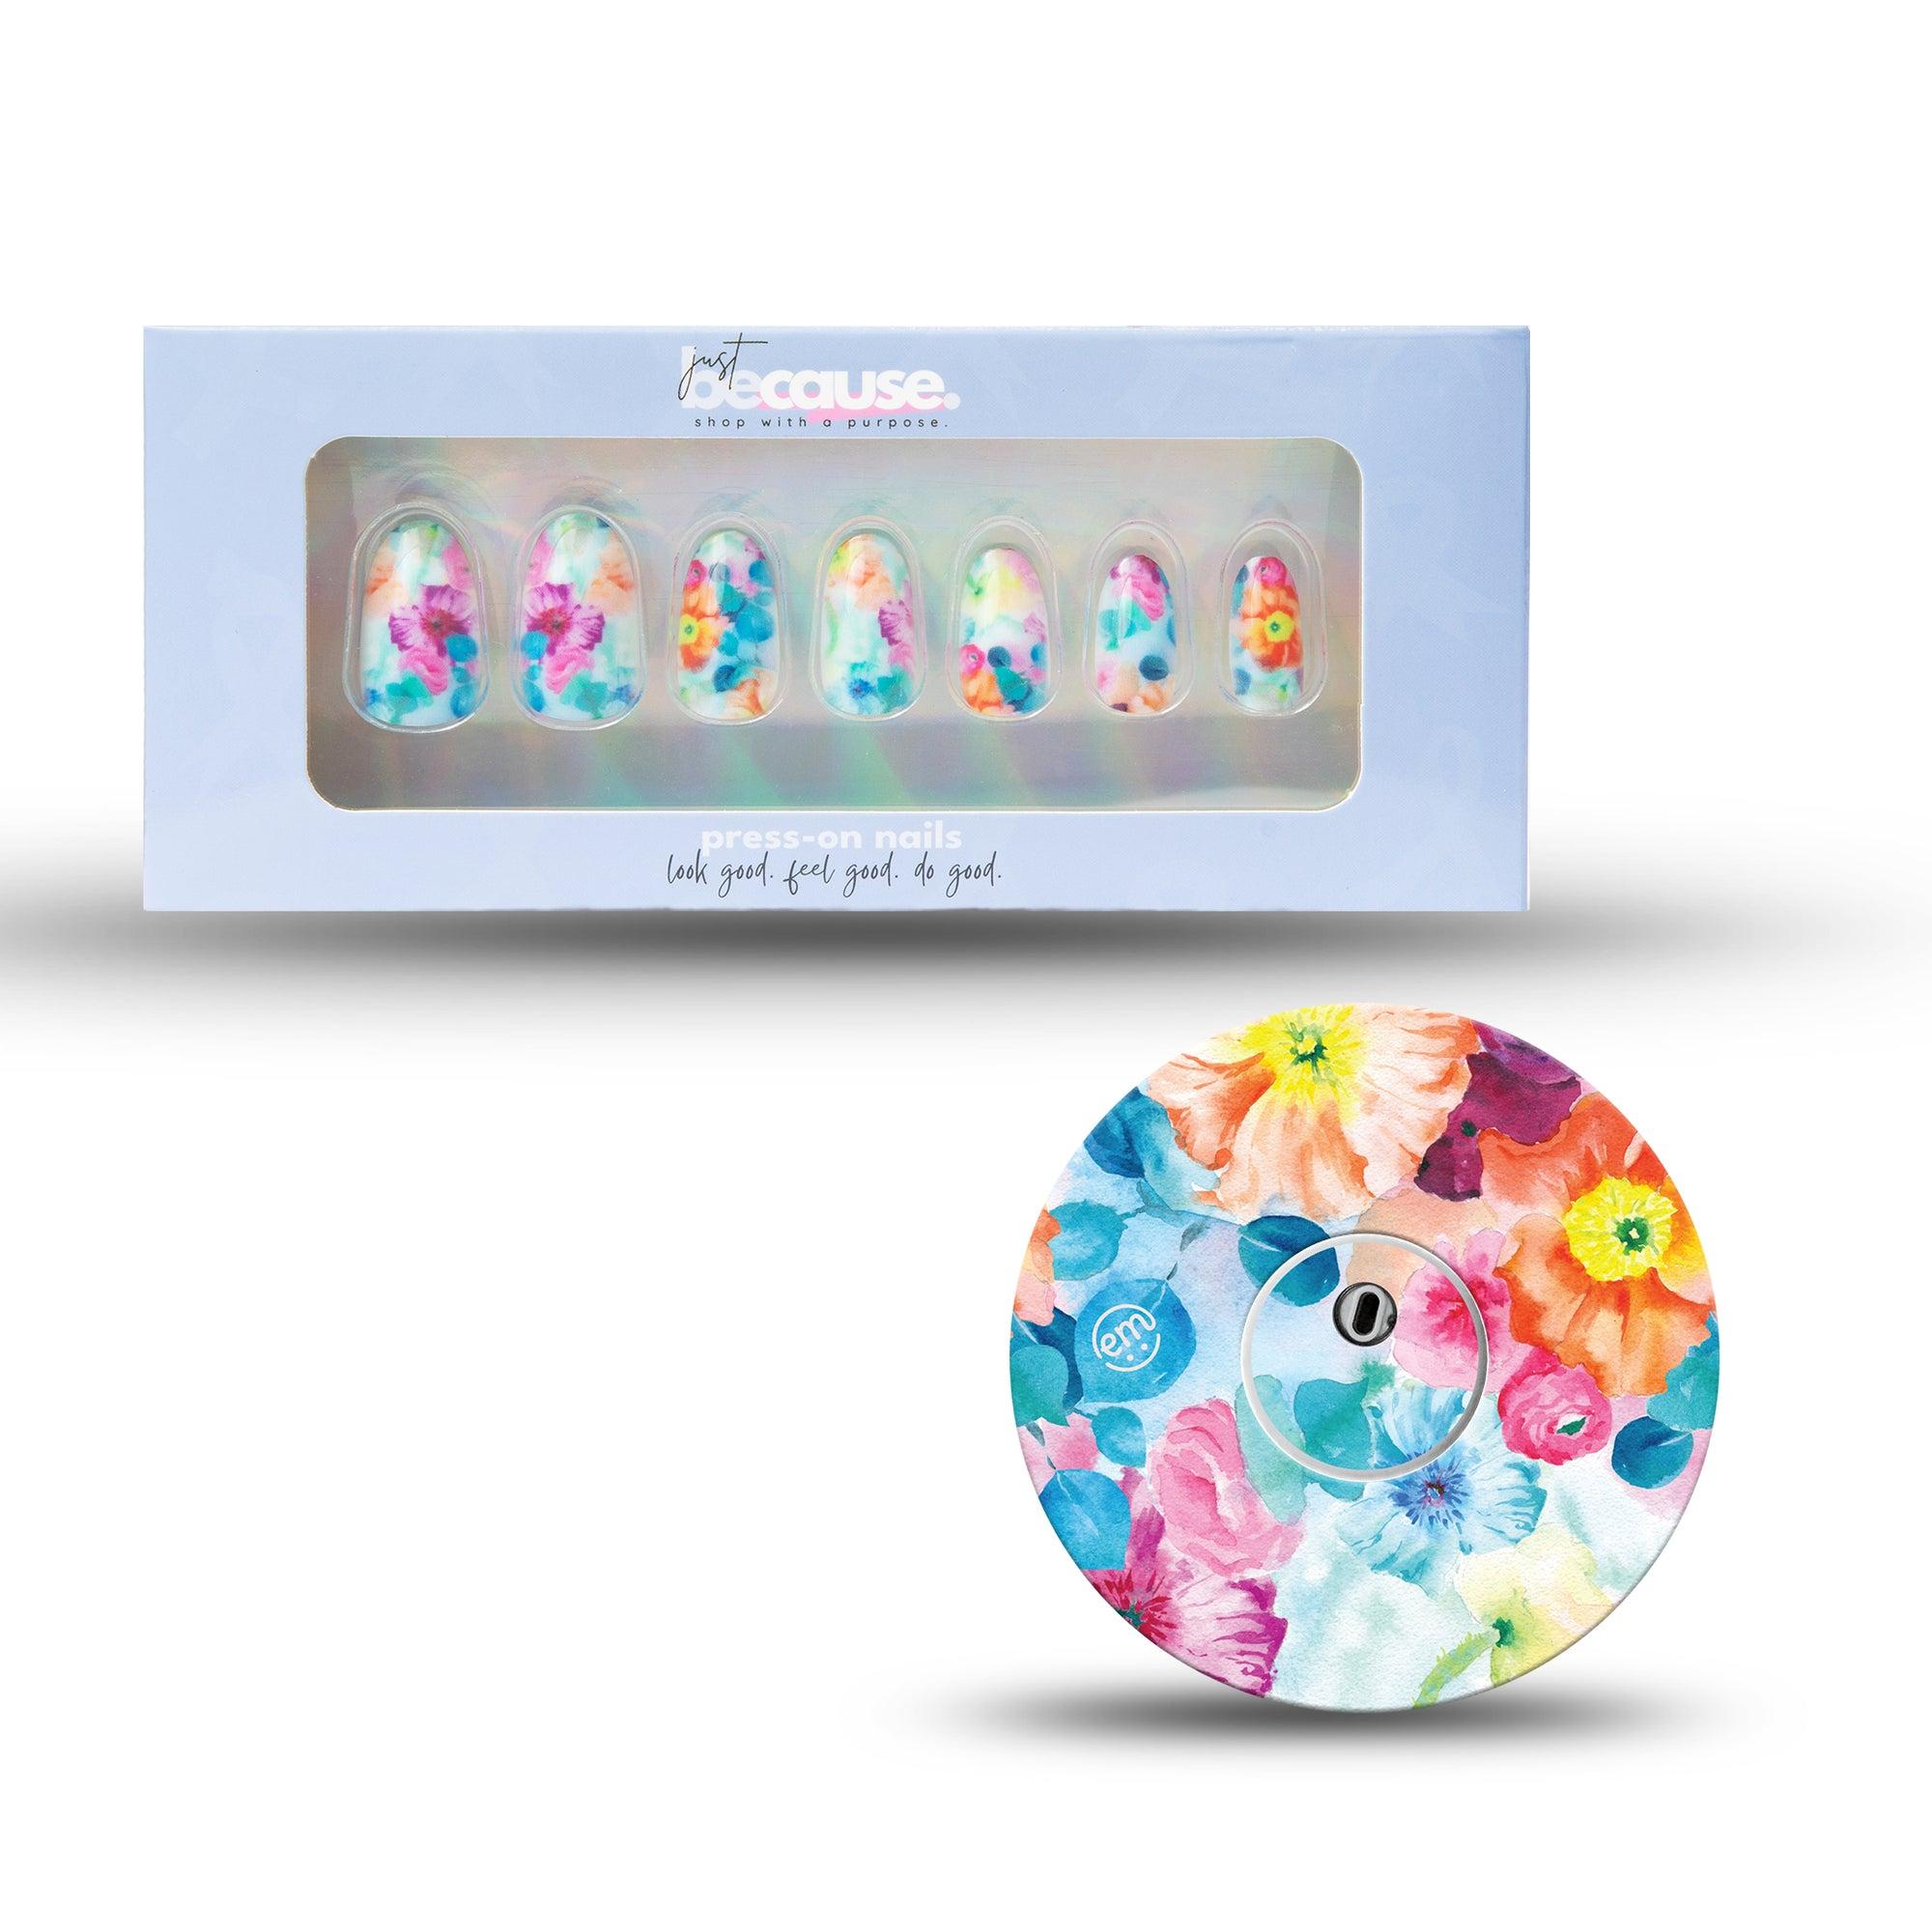 Just BeCause 24 Pcs ABS Press on nails Medium, blue and pink floral Fake Nails set with matching Watercolor Poppies Libre 3 Overlay Patch and Center Sticker, Support T1D - ExpressionMed.com	